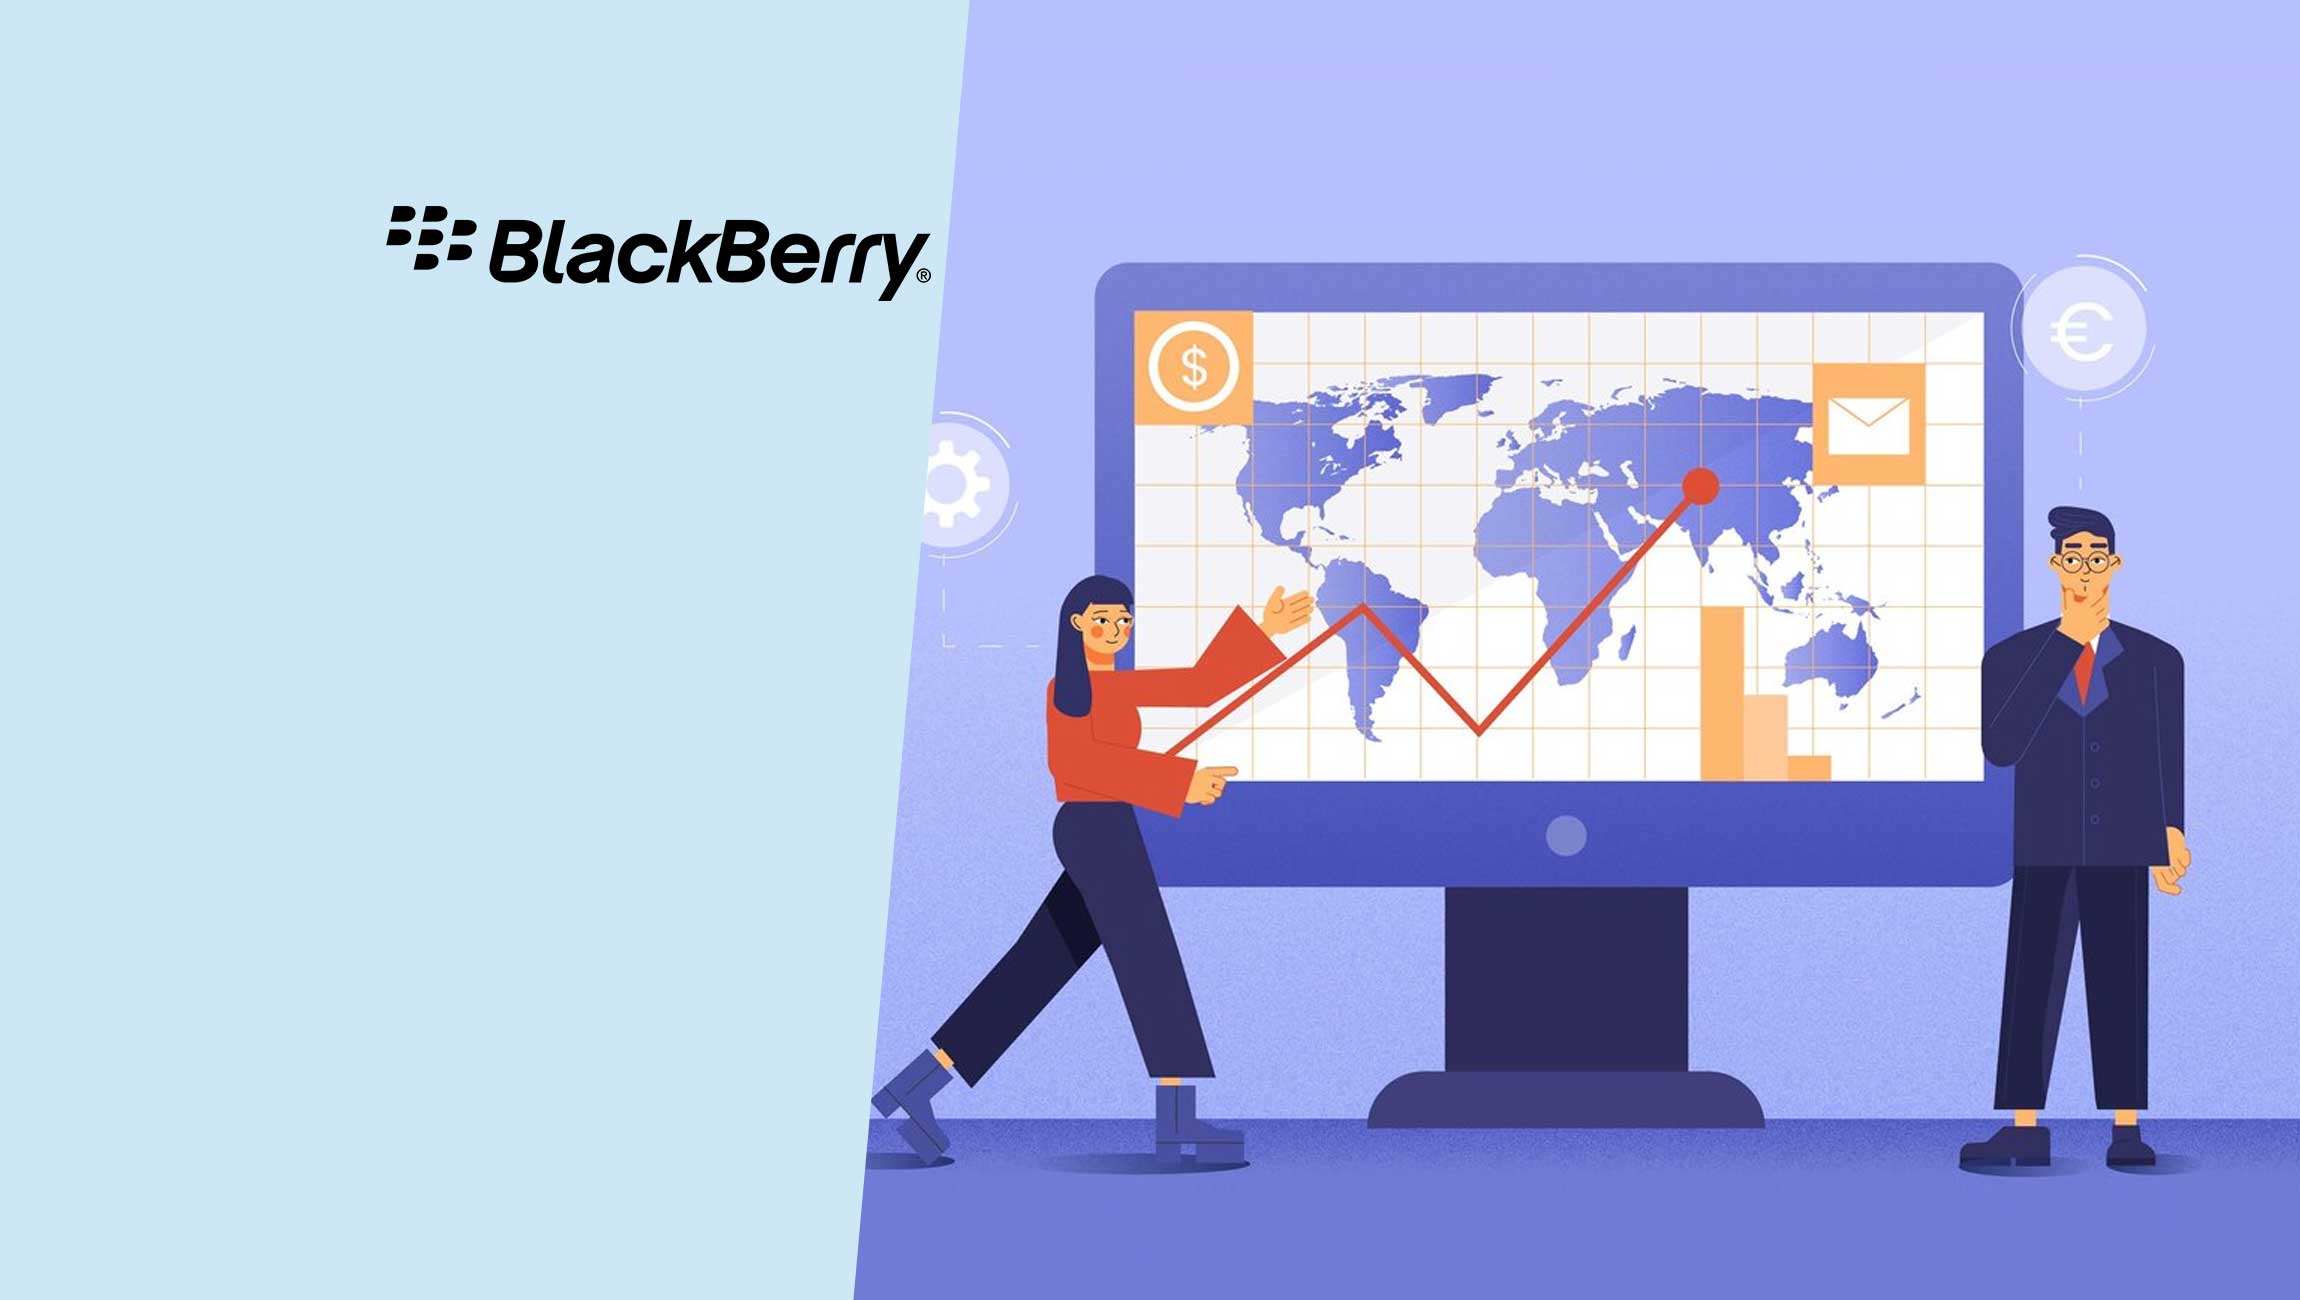 Software Supply Chain Attacks Have Increased Financial and Reputational Impacts on Companies Globally, New BlackBerry Research Reveals